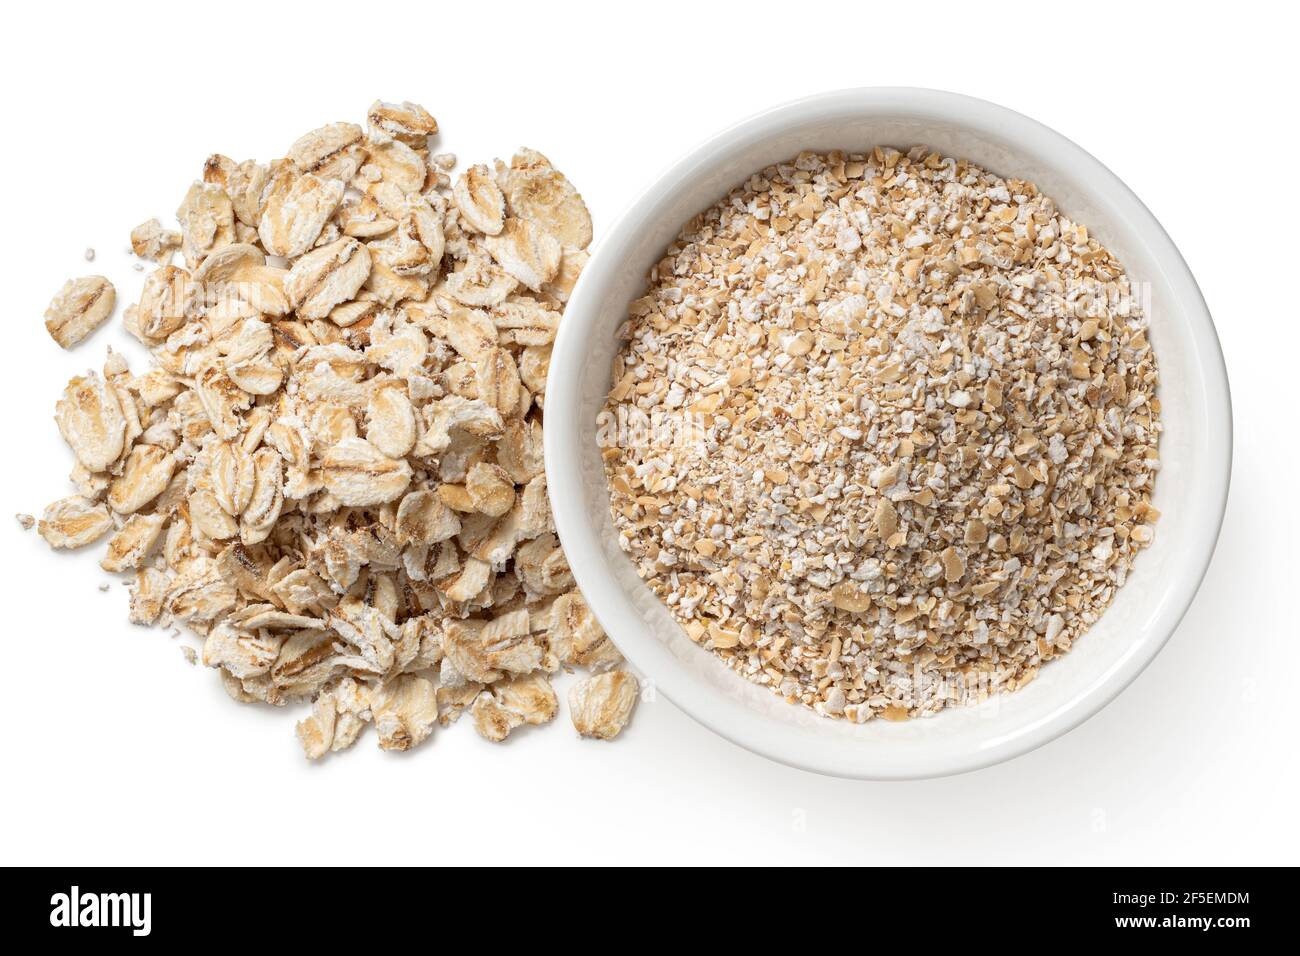 Uncooked coarse oatmeal in a white ceramic bowl next to a pile of uncooked porridge oats isolated on white. Top view. Stock Photo